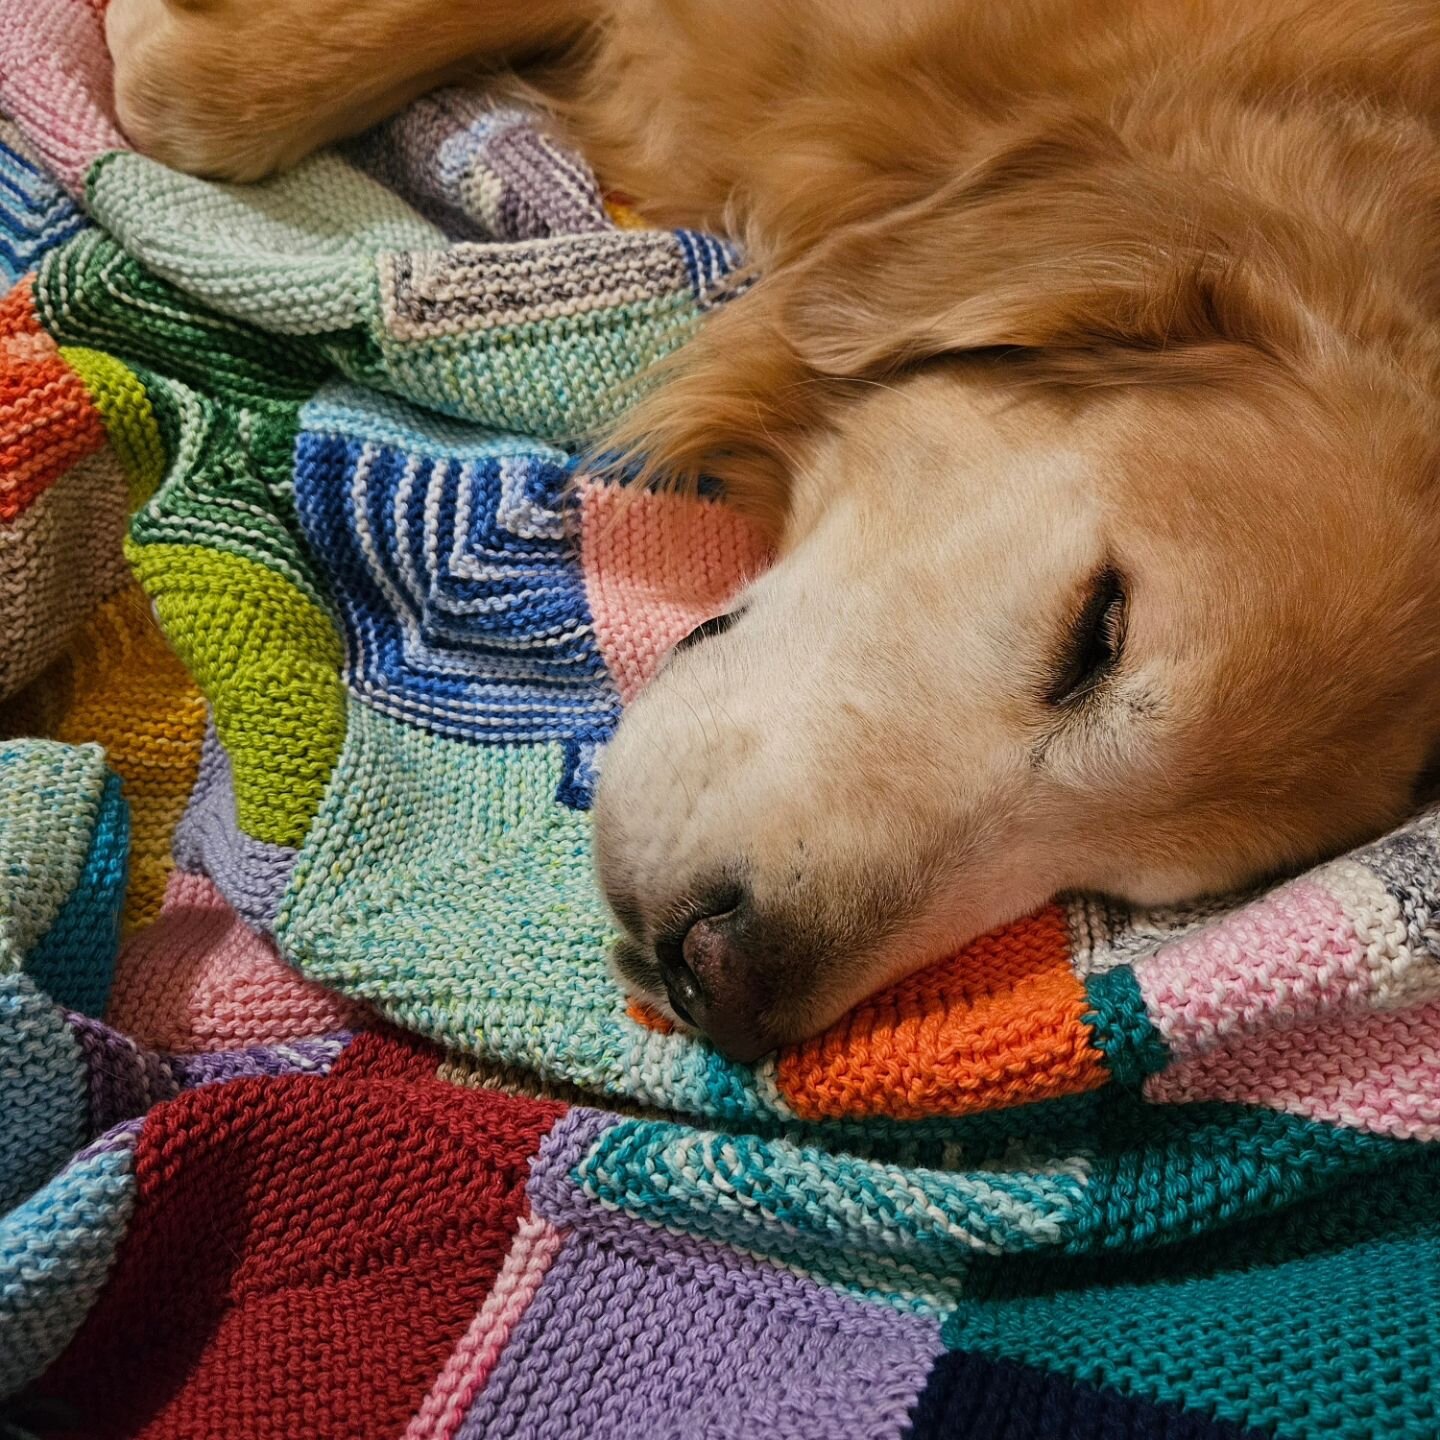 Dudley and I decided to work on our Mitered Square Blanket tonight. It's that one project of ours that gets pulled out every once in a while to work on.

We're knitting our blanket using leftover pieces and partial balls of crafting cotton yarn. Most